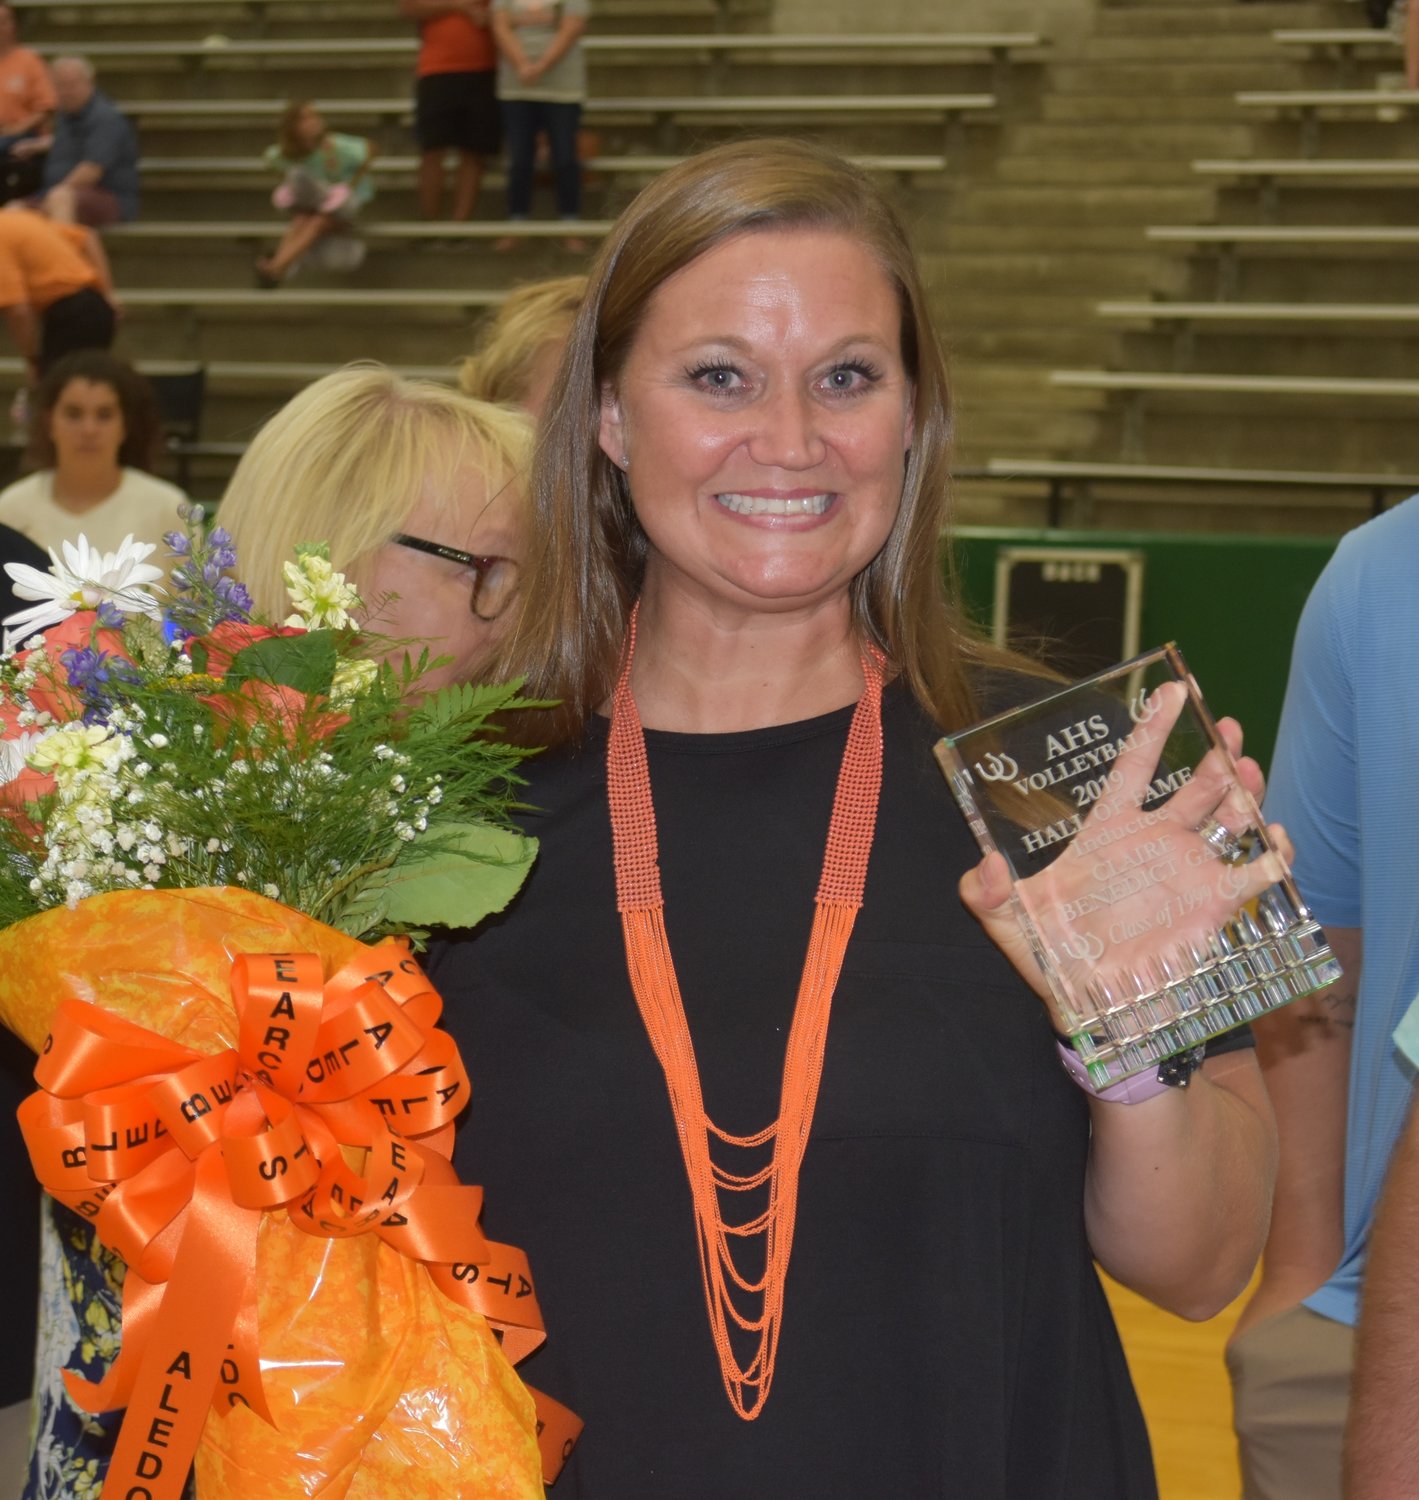 Aledo head volleyball coach Claire Gay is shown with her plaque recognizing her as a new member of the Arlington High School Hall of Fame. Over the weekend, Gay won her 400th career match and will look to add to that win total today when the Ladycats host Arlington Seguin. Photo by Tony Eierdam